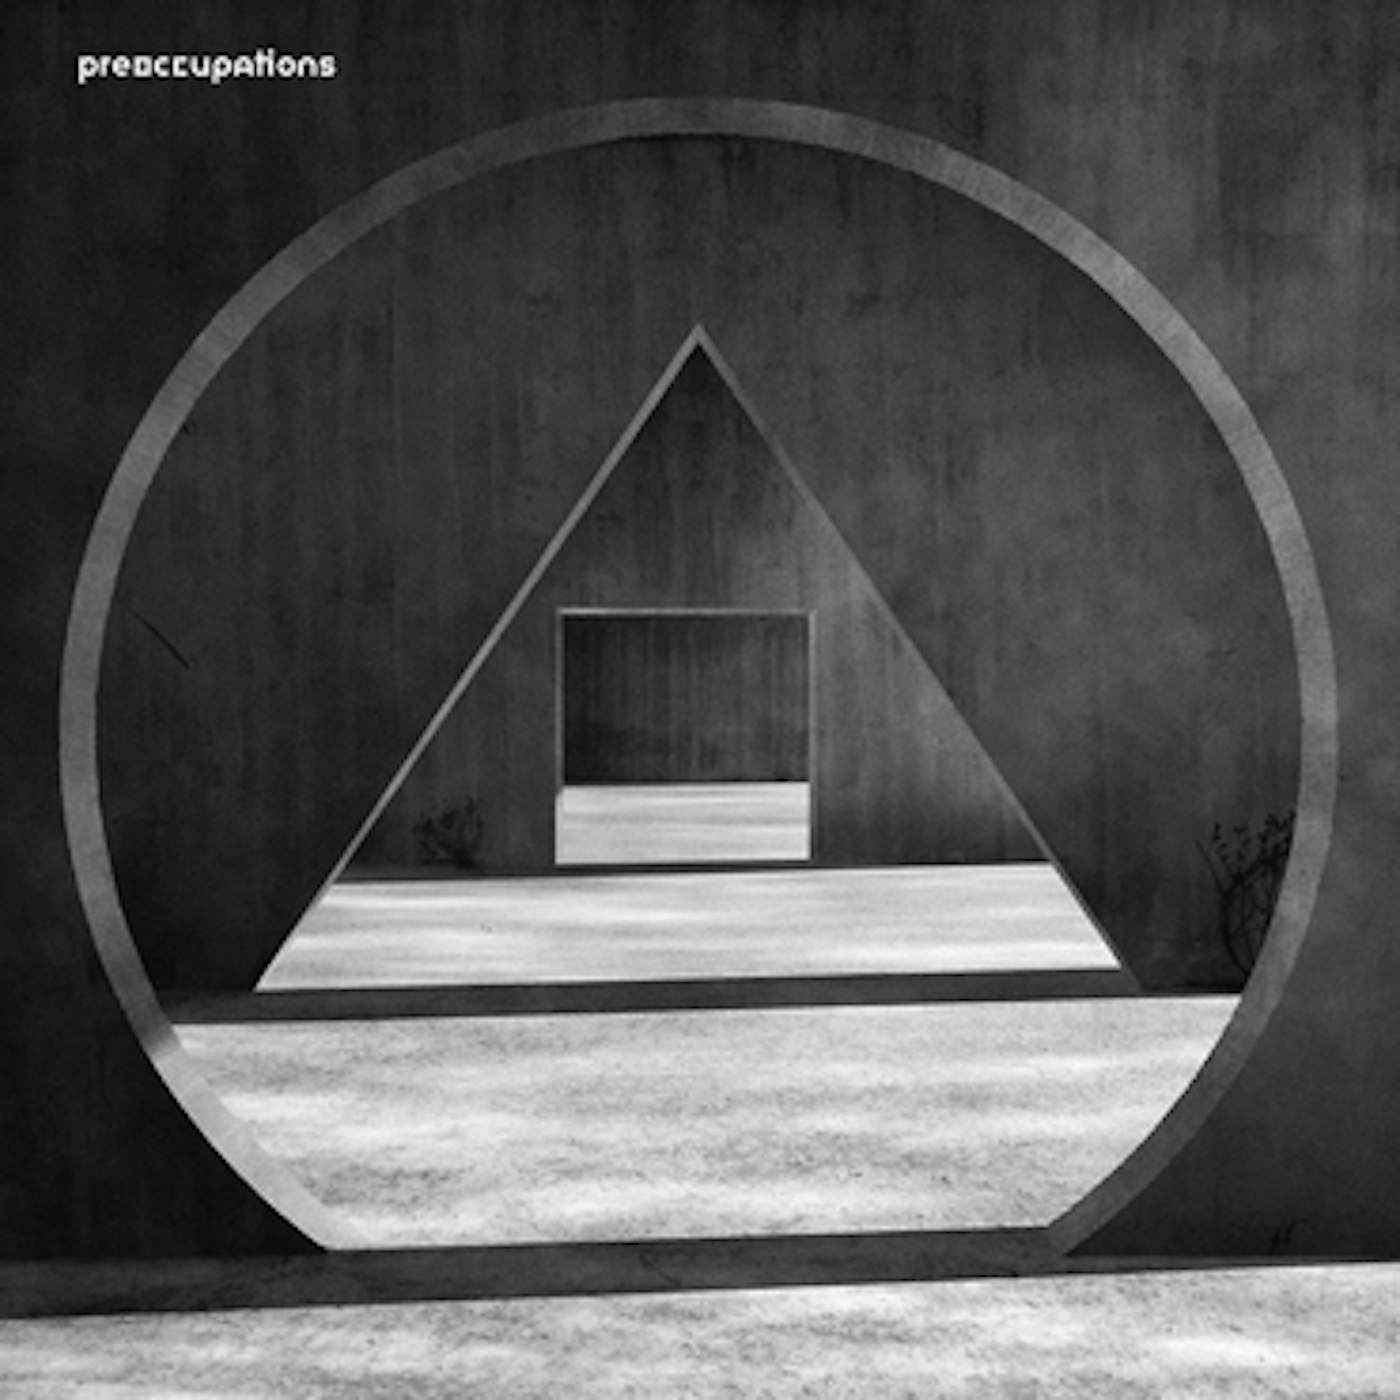 Preoccupations New Material Vinyl Record